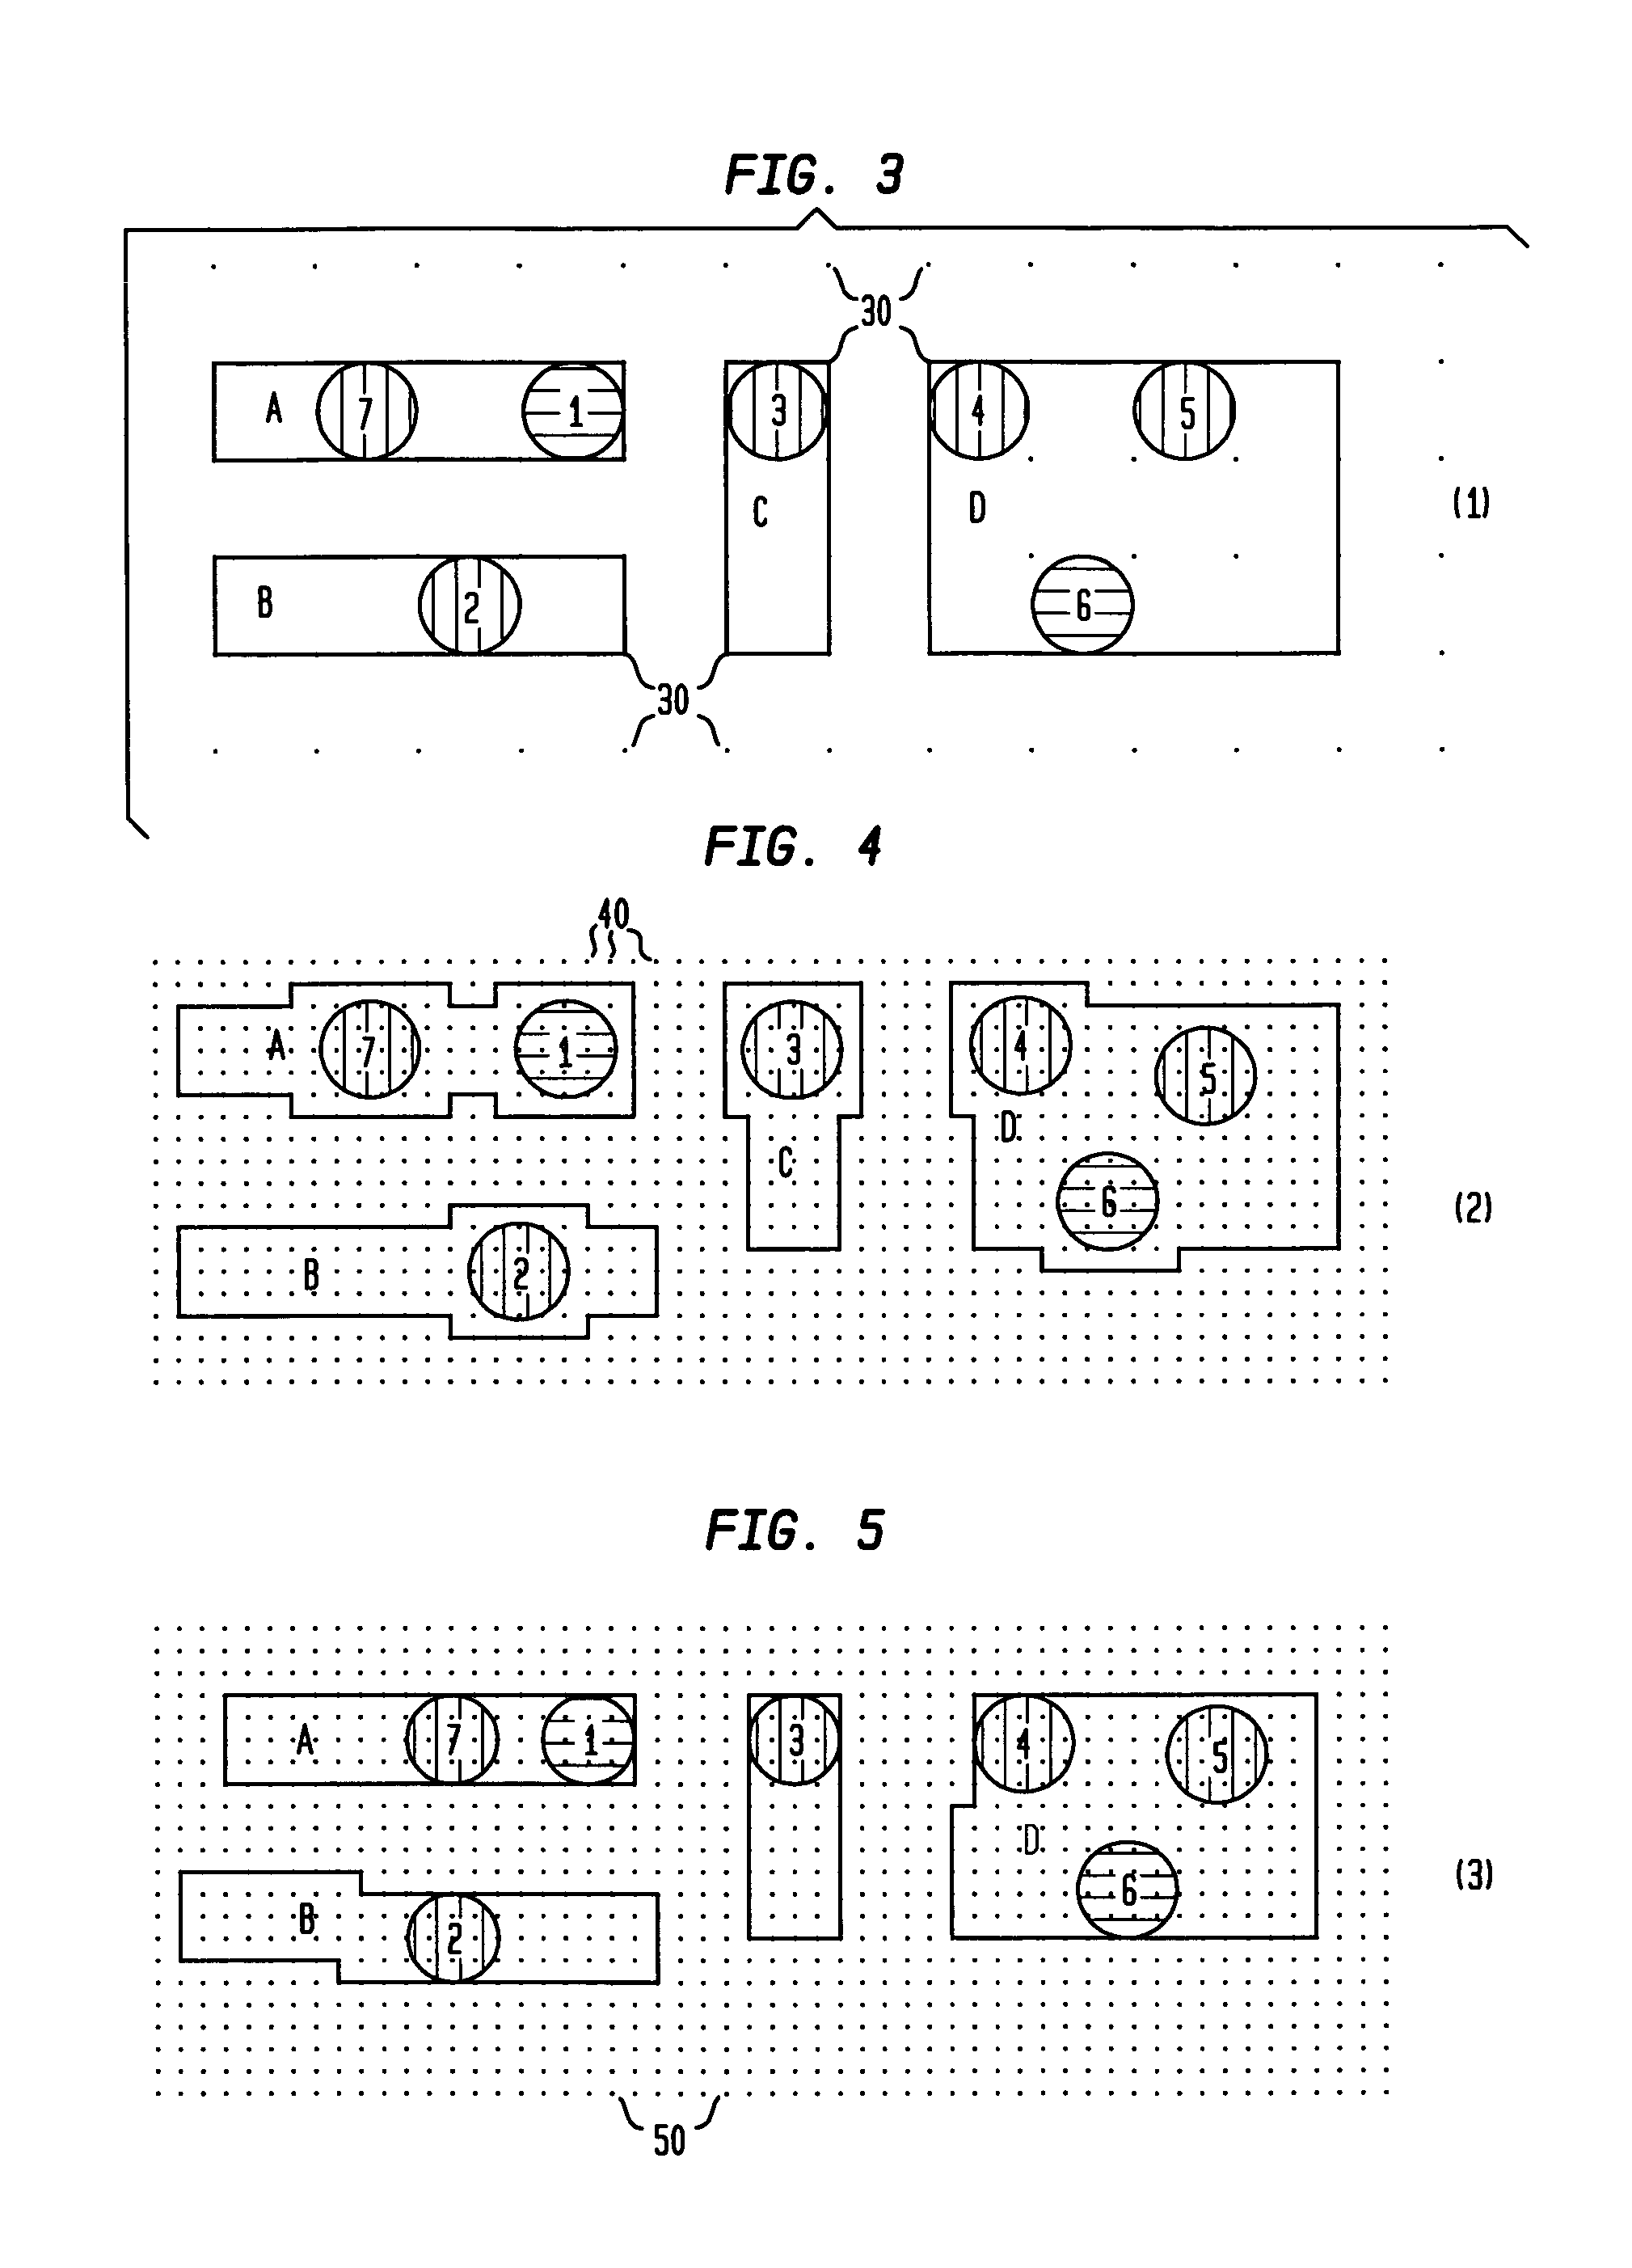 Circuit layout methodology using a shape processing application